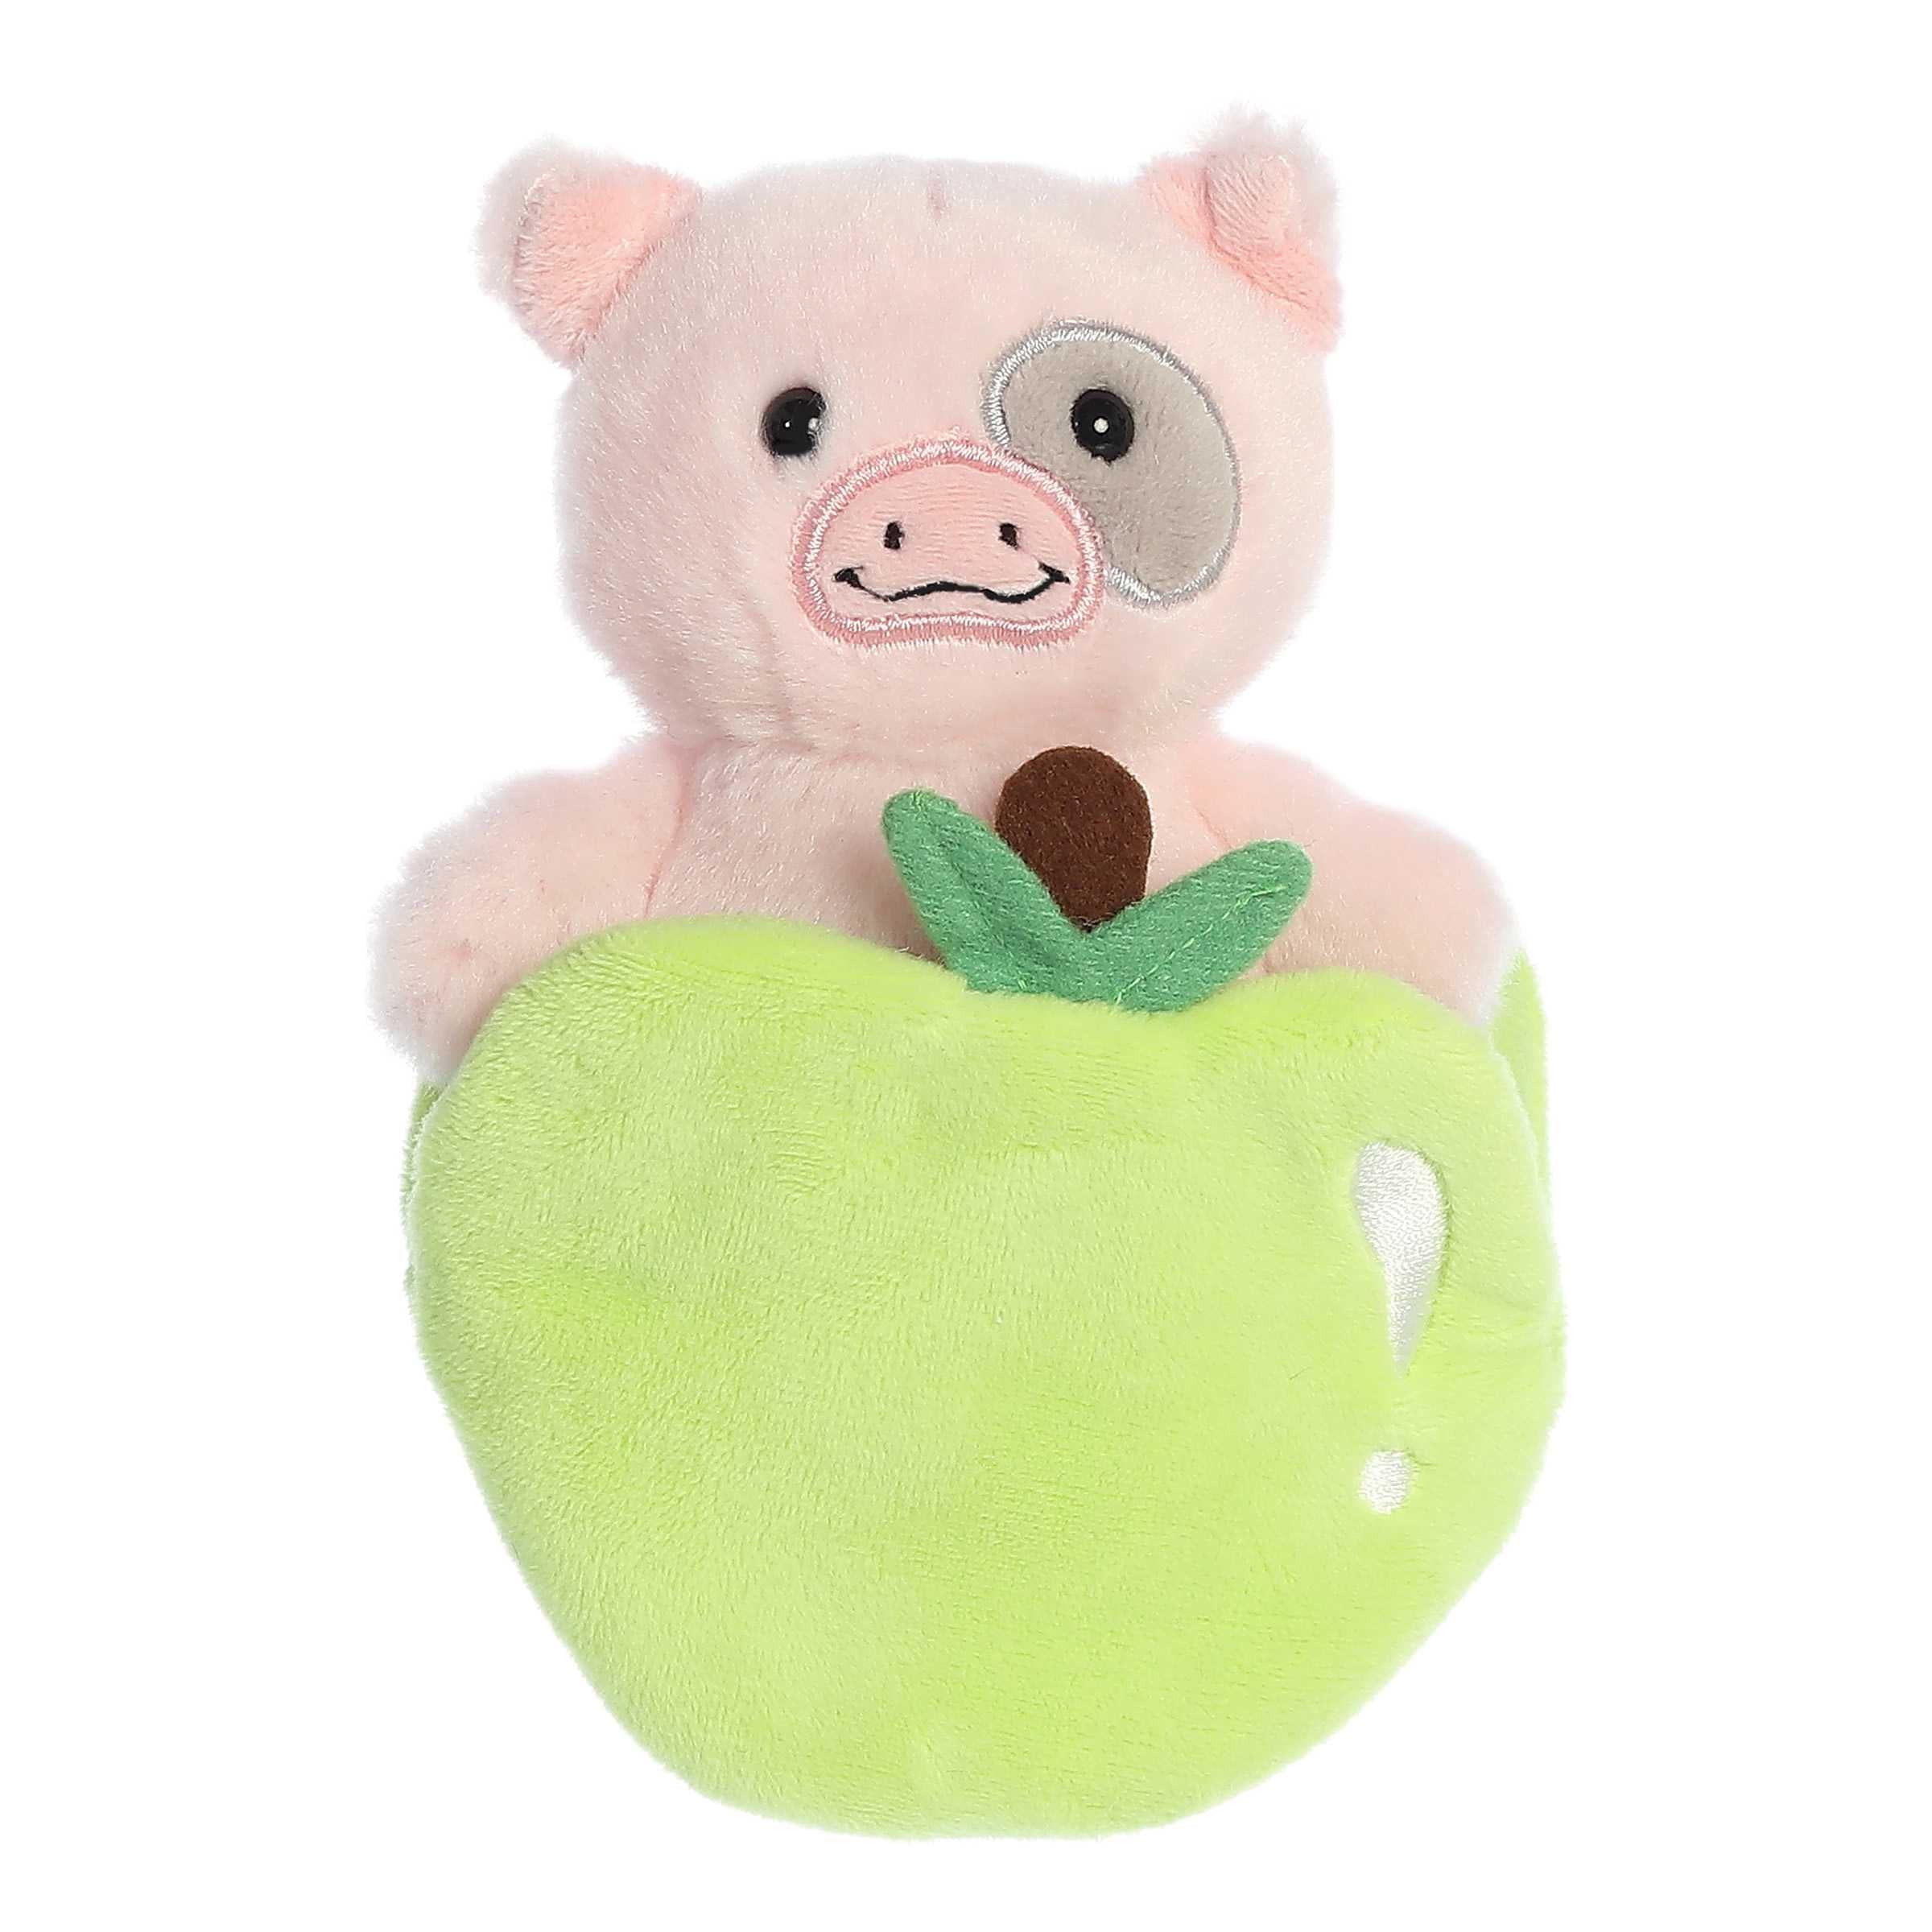 Cute pink Piglet plush rattle toy with smiling face and gray accent on eye sitting inside a crinkly green apple pocket